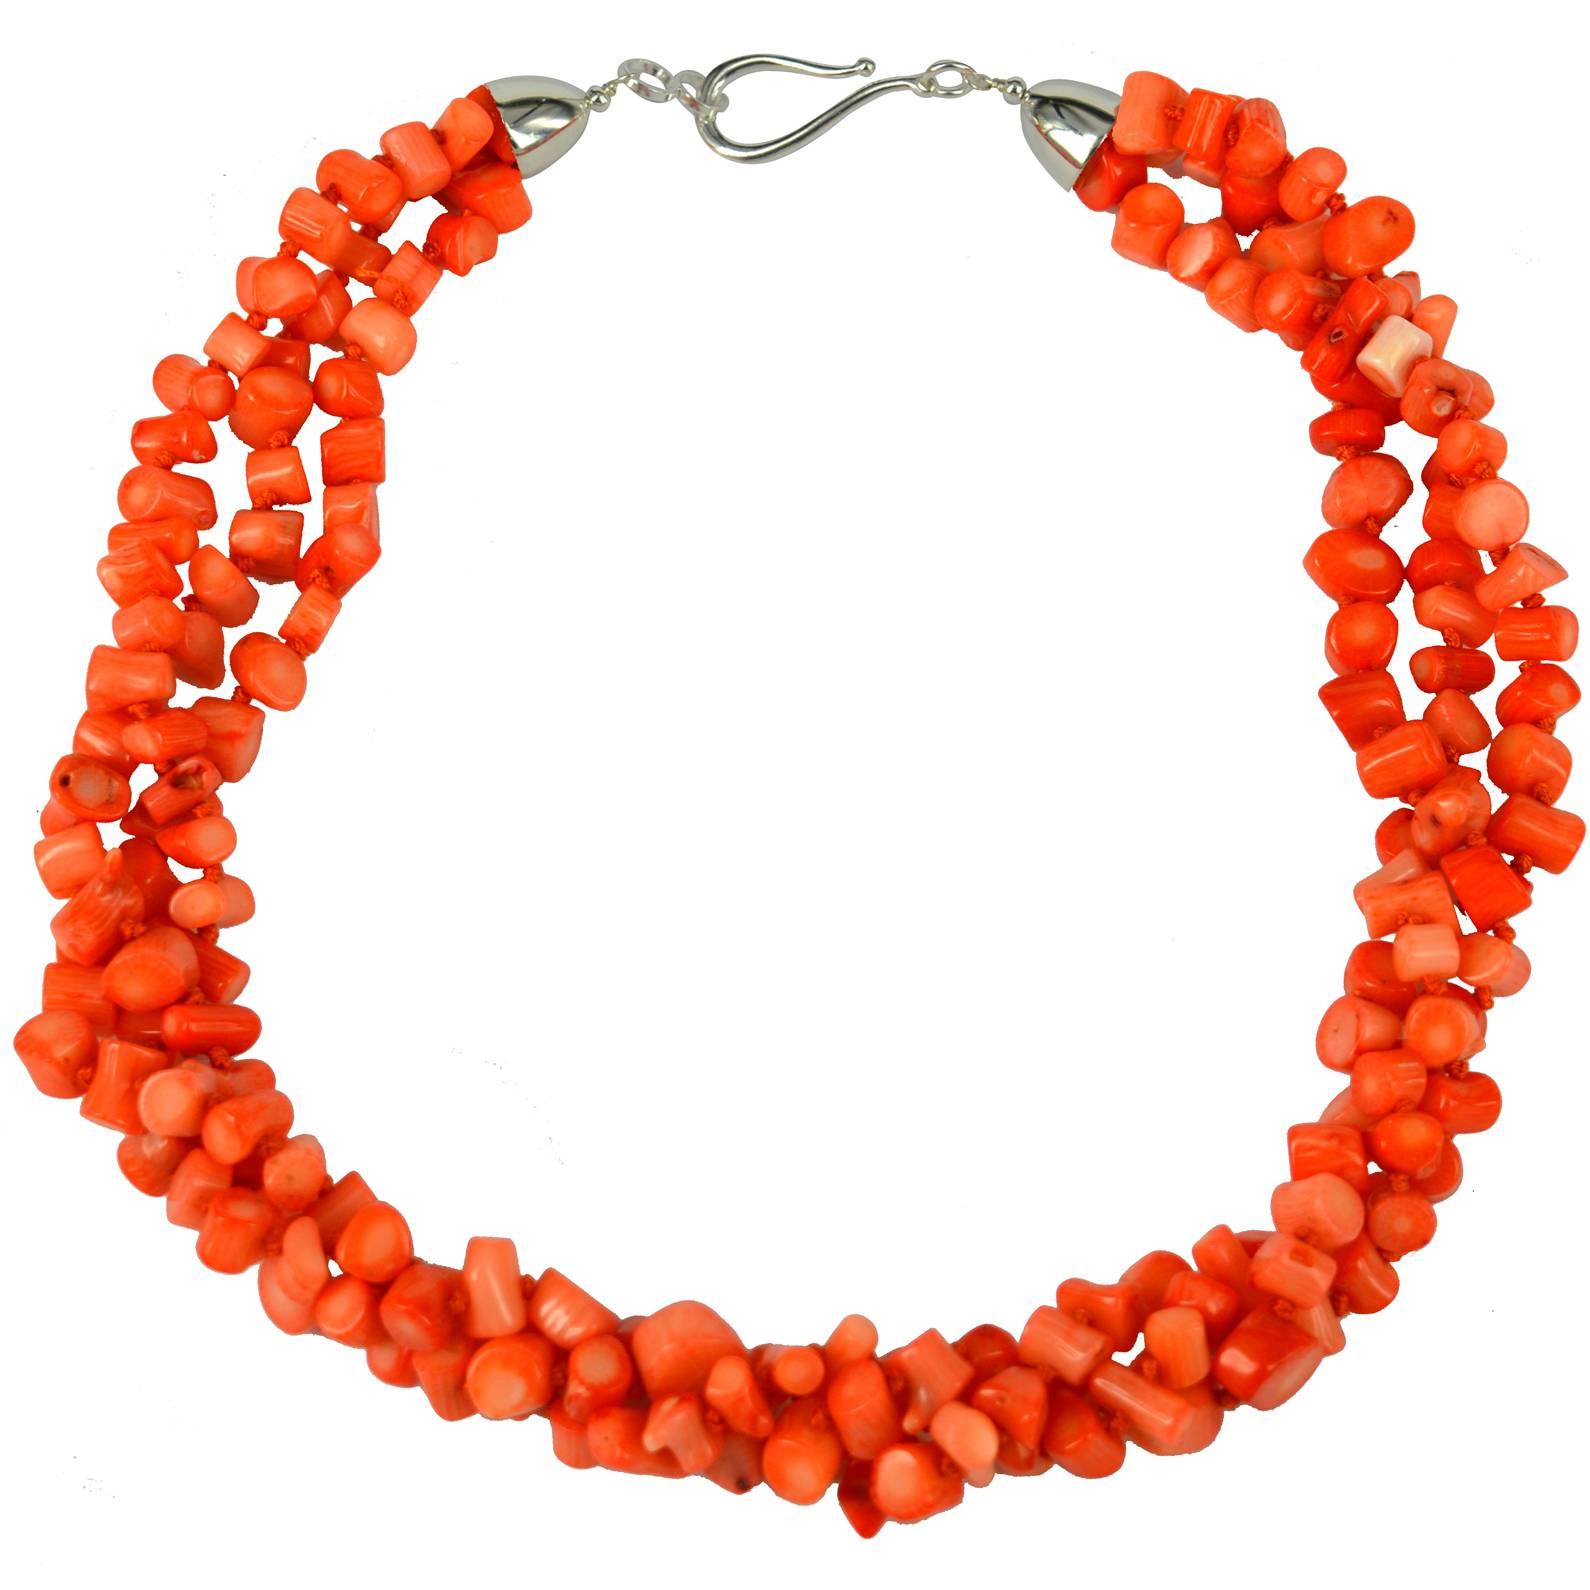 Decadent Jewels 3 strands of Apricot Sea Bamboo Coral side drilled tube beads approx 8x6mm finished with a Sterling Silver Dome cap and a 40mm Sterling Silver hook Clasp, hand knotted for strength and durability.

Finished Necklace measures 53cm